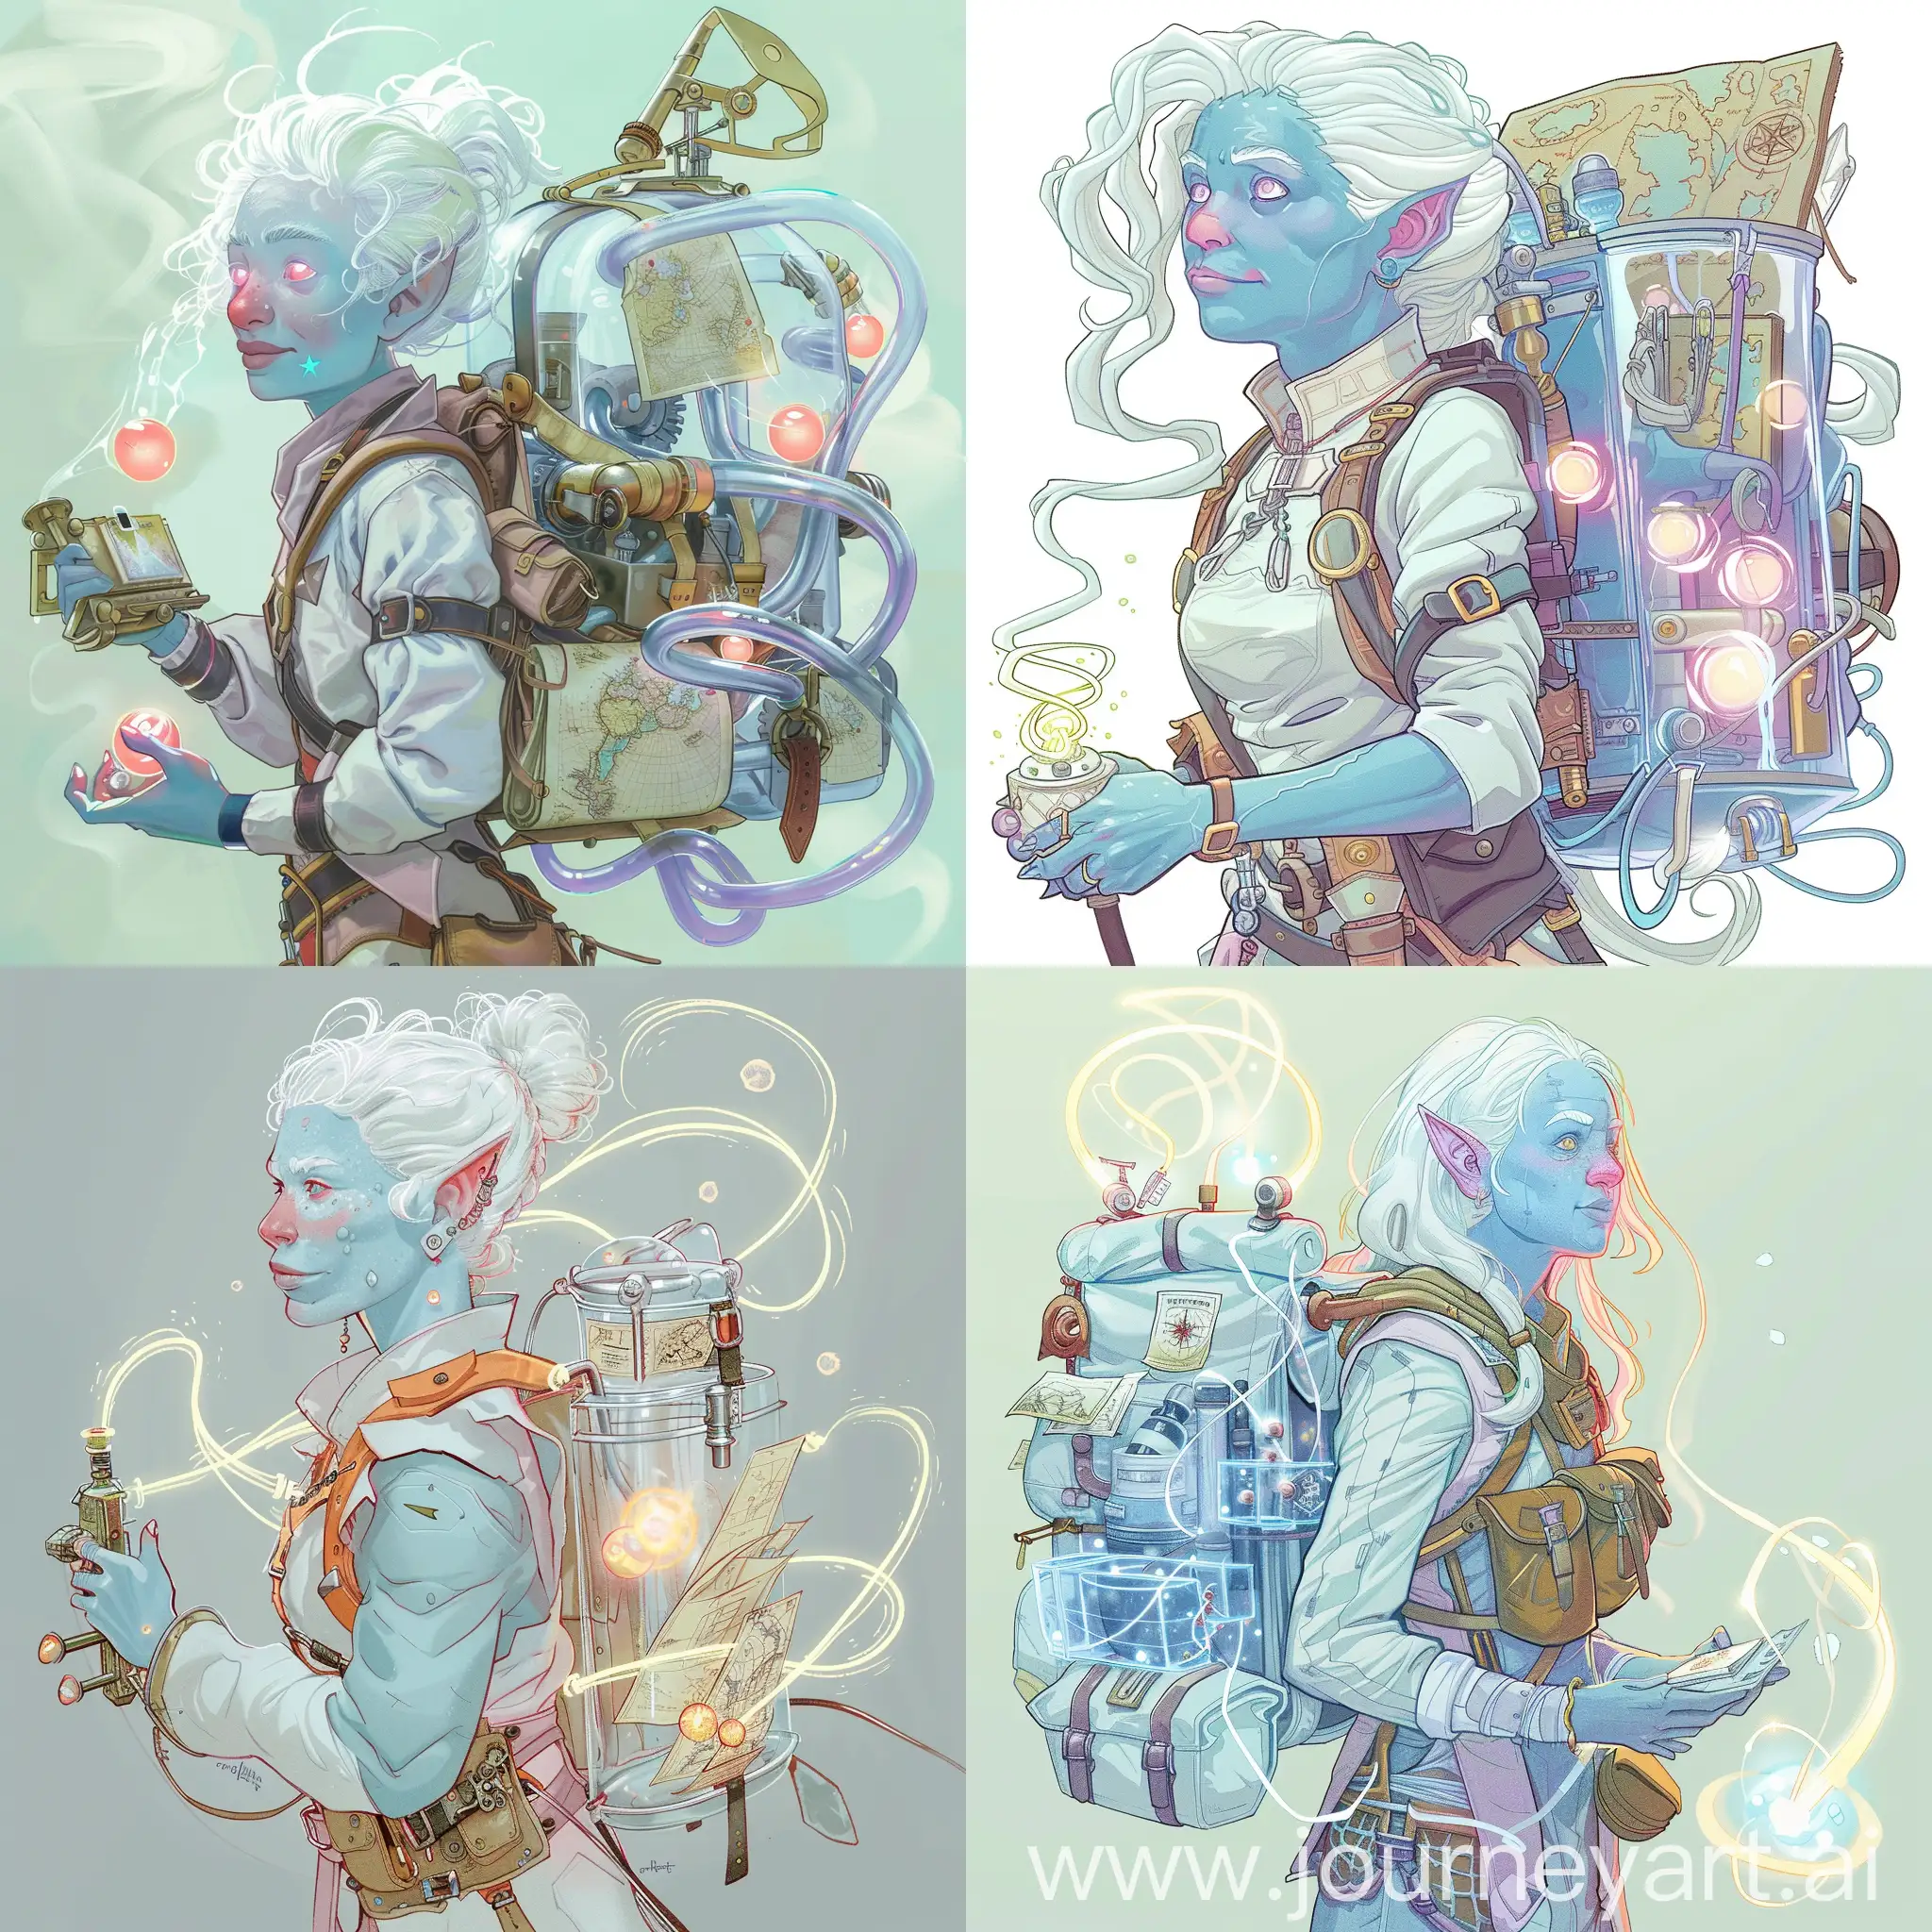 Whimsical-Dungeons-and-Dragons-Female-Firbolg-Artificer-Portrait-with-SteampunkInspired-Backpack-and-Magical-Parchment-Maps